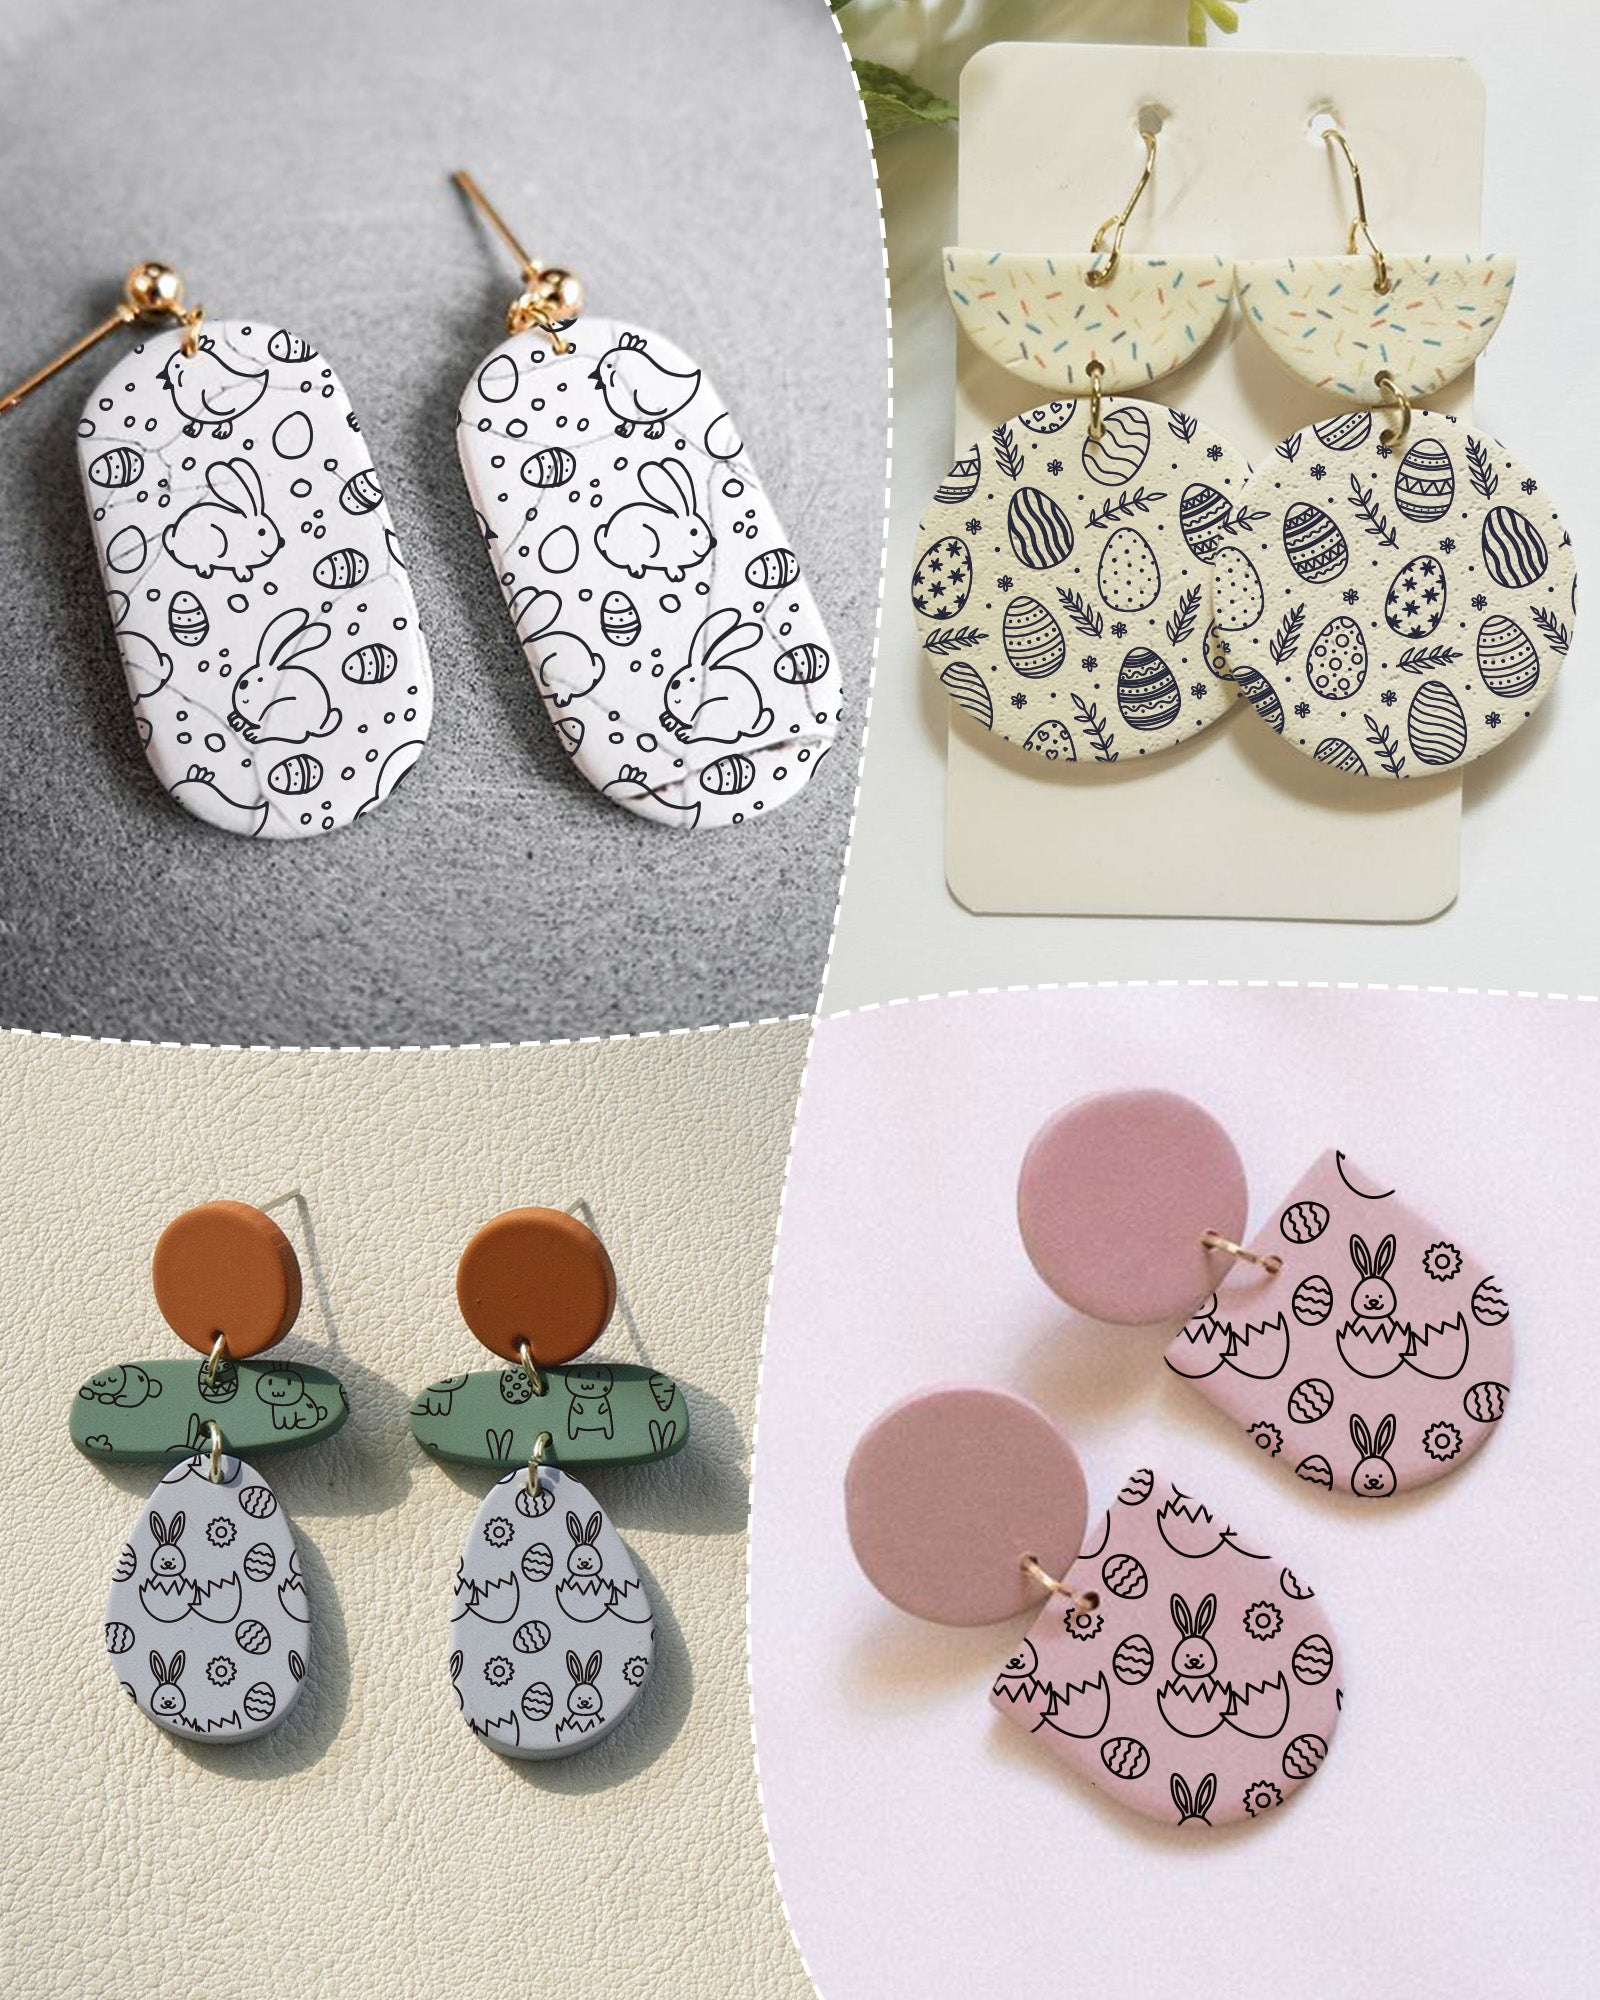 Puocaon Easter Clay Silk Screen - 6 Pcs Polymer Clay Silk Screen Stencils for Earrings Jewelry, Easter Eggs Silk Screen Stencils for Polymer Clay Earrings, Cute Rabbit Polymer Clay Silk Screen